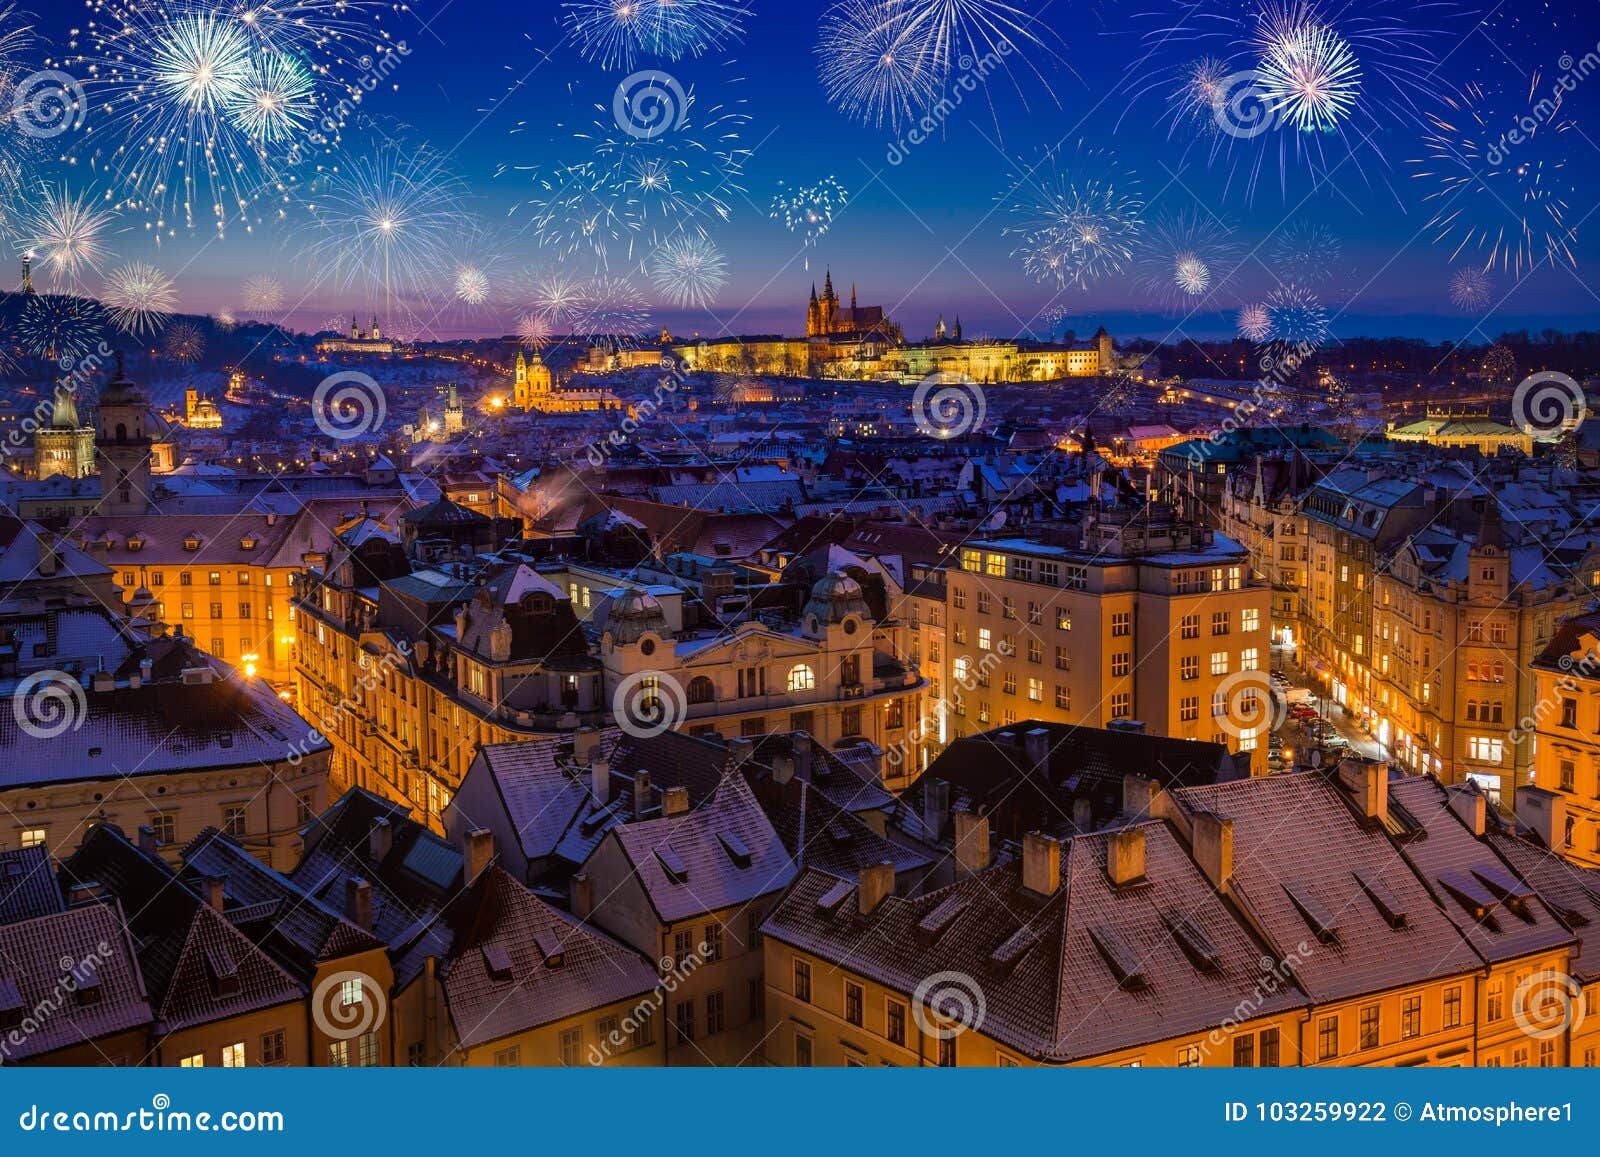 fireworks above prague castle with snowy rooftops during late christmas sunset